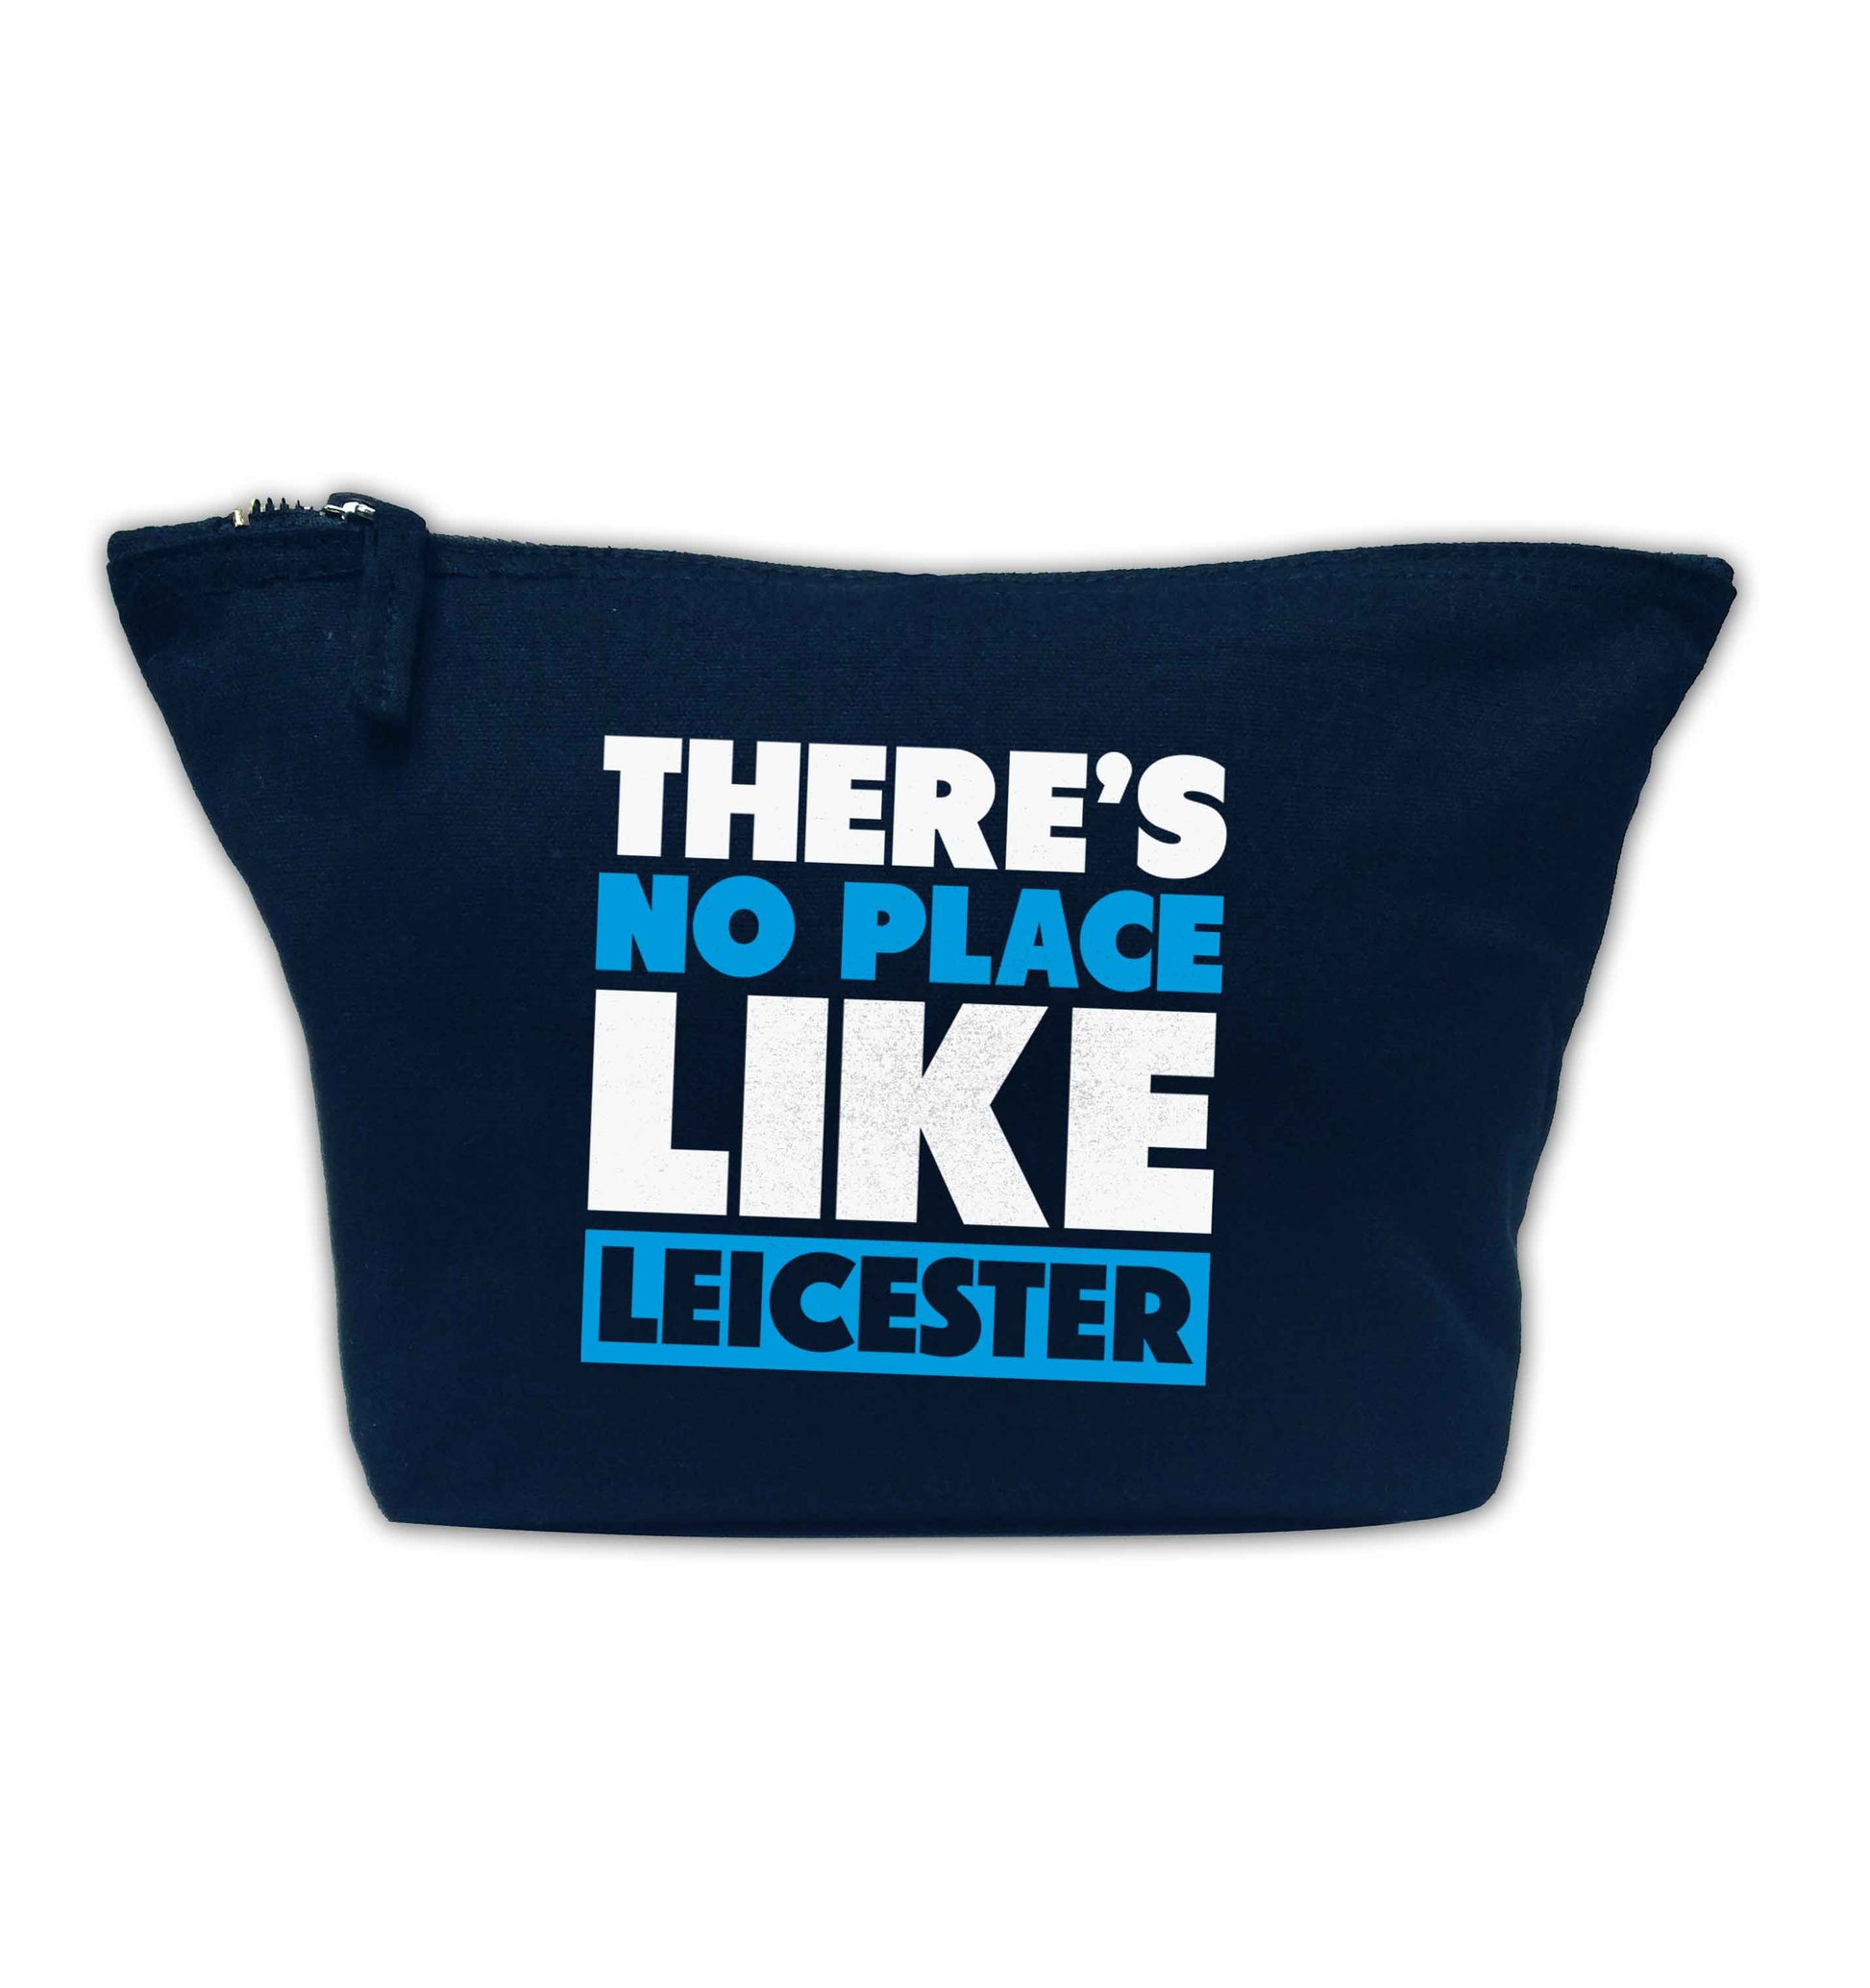 There's no place like Leicester navy makeup bag